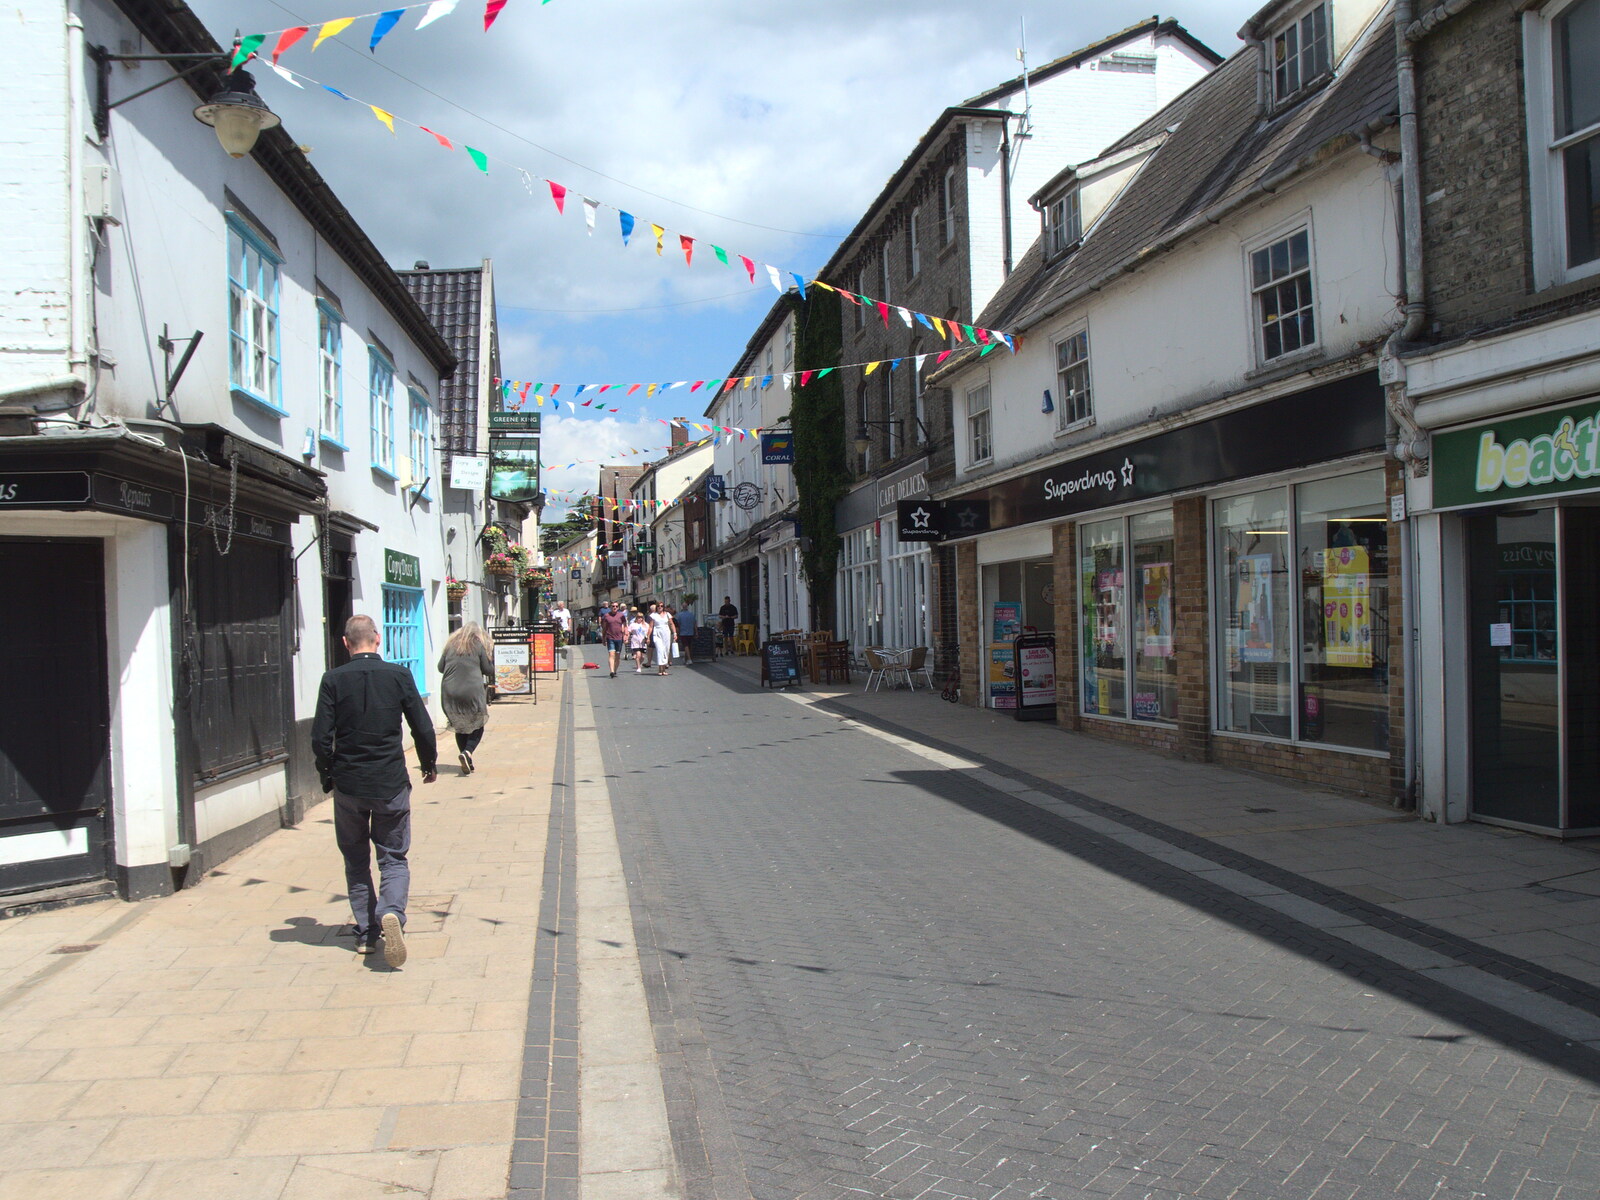 Mere Street is quiet for a Saturday from A Visit to the Kittens, Scarning, Norfolk - 13th June 2021